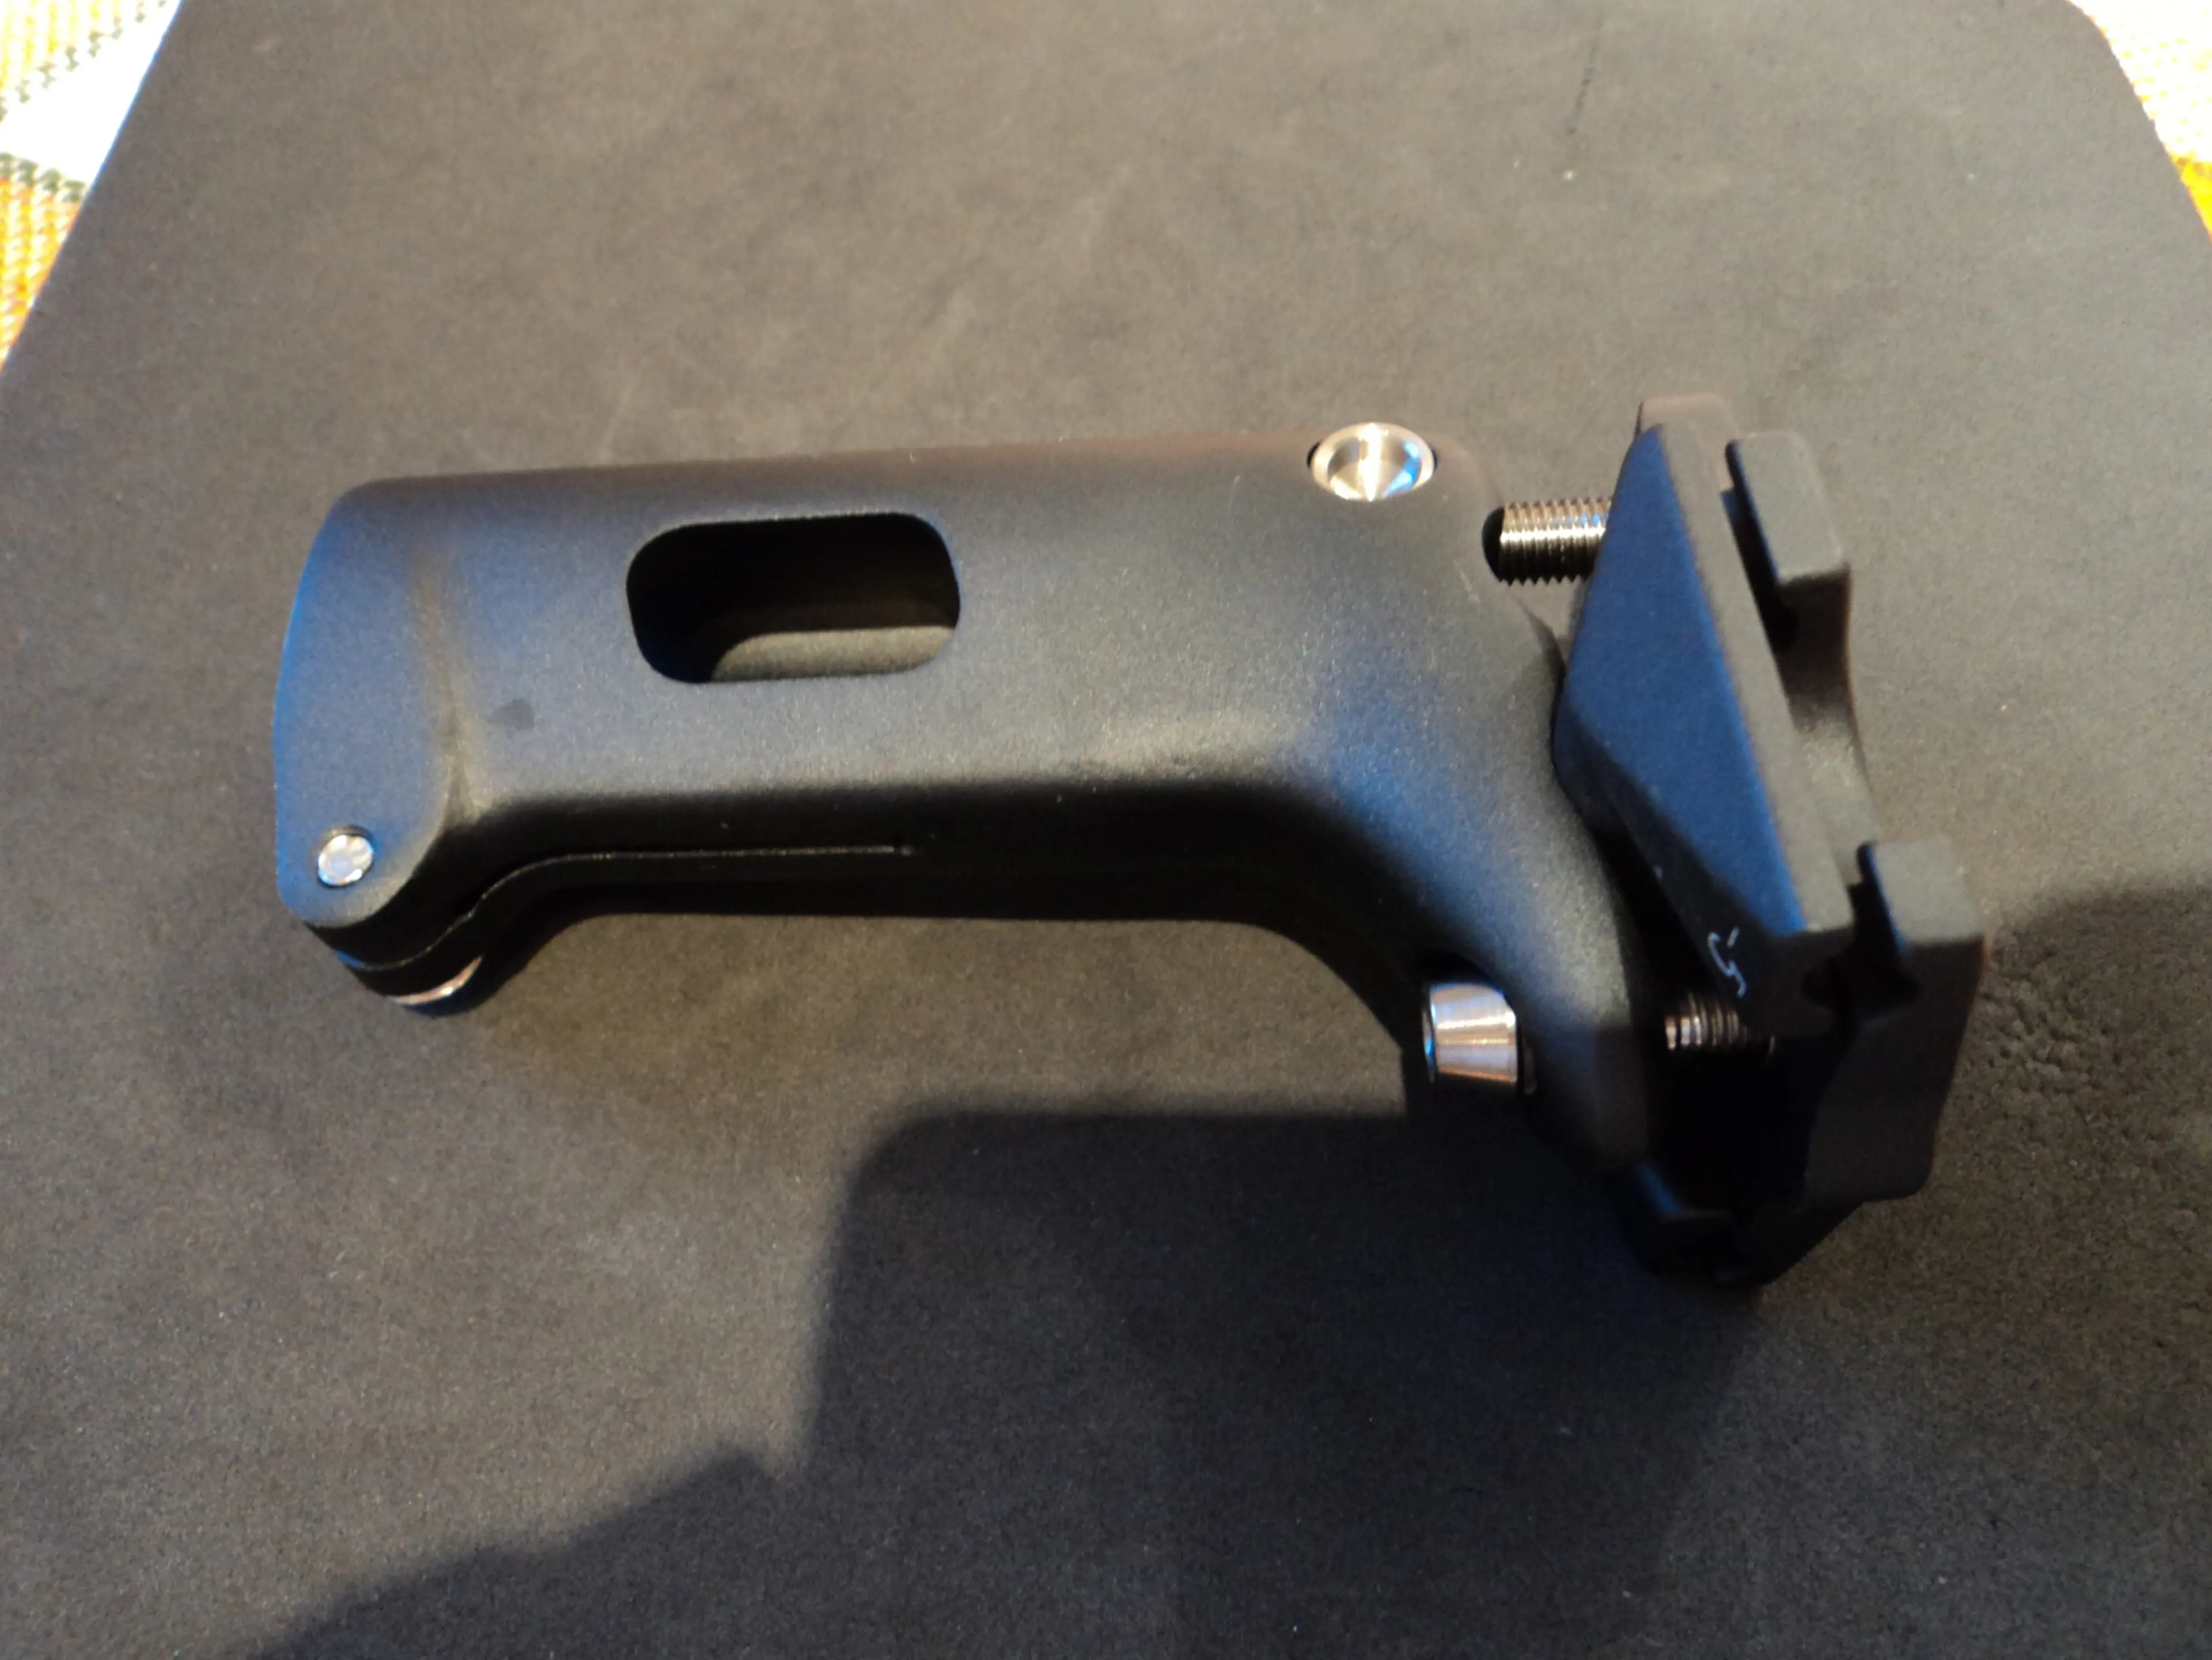 2. Giant tcr isp seat clamp - long